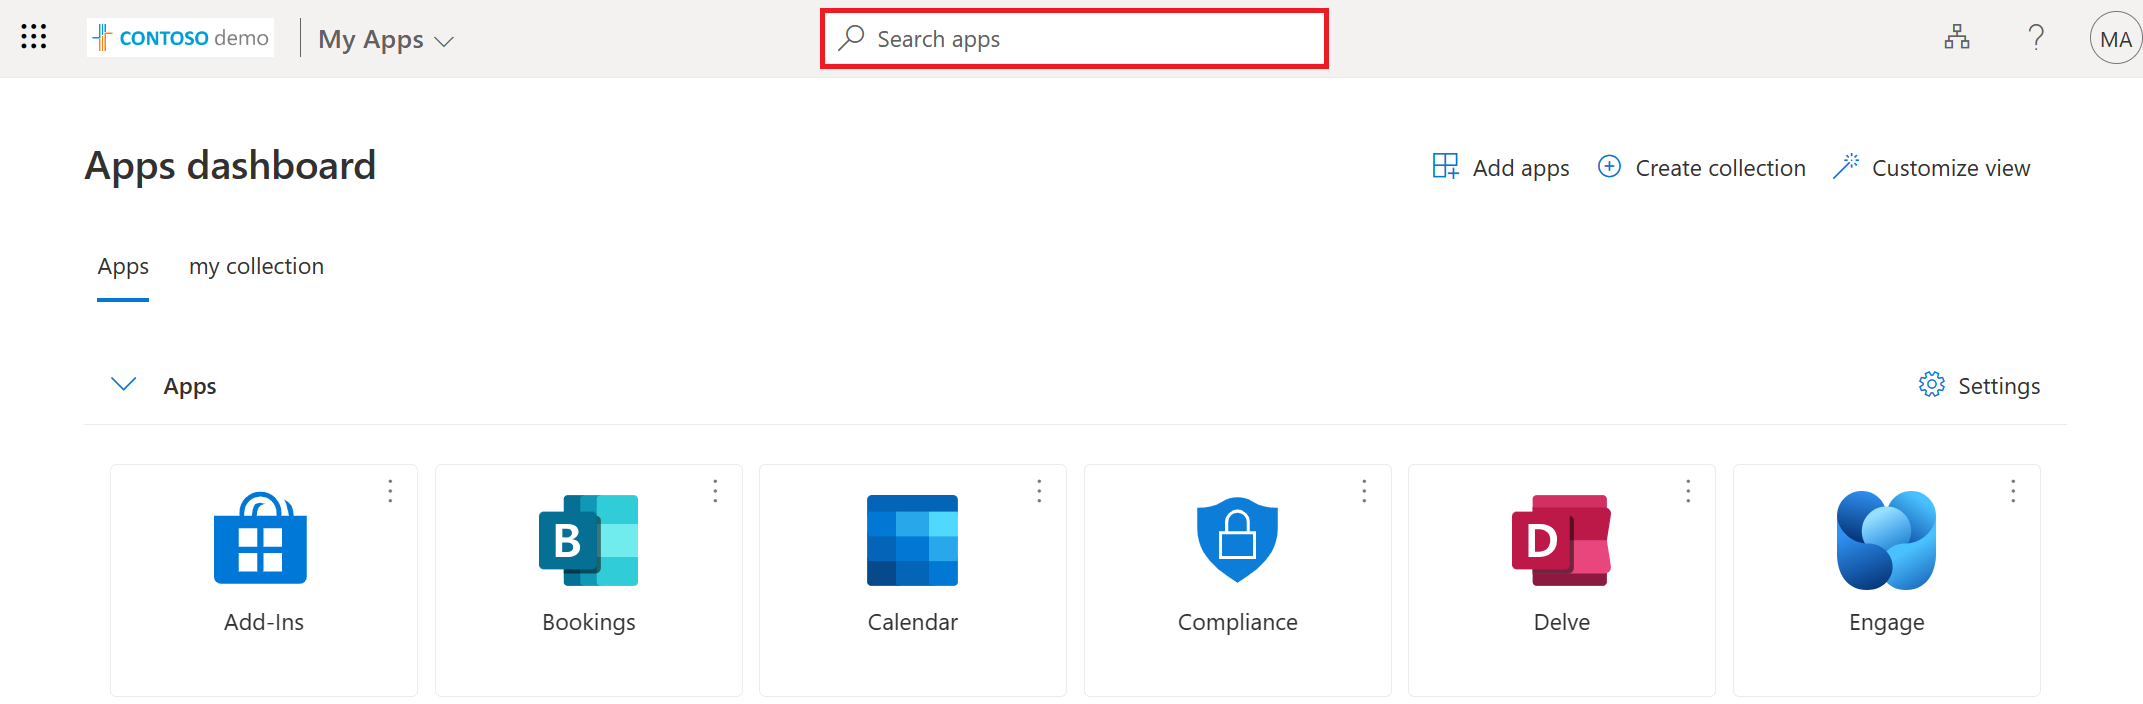 Screenshot that shows the search box for the My Apps portal.